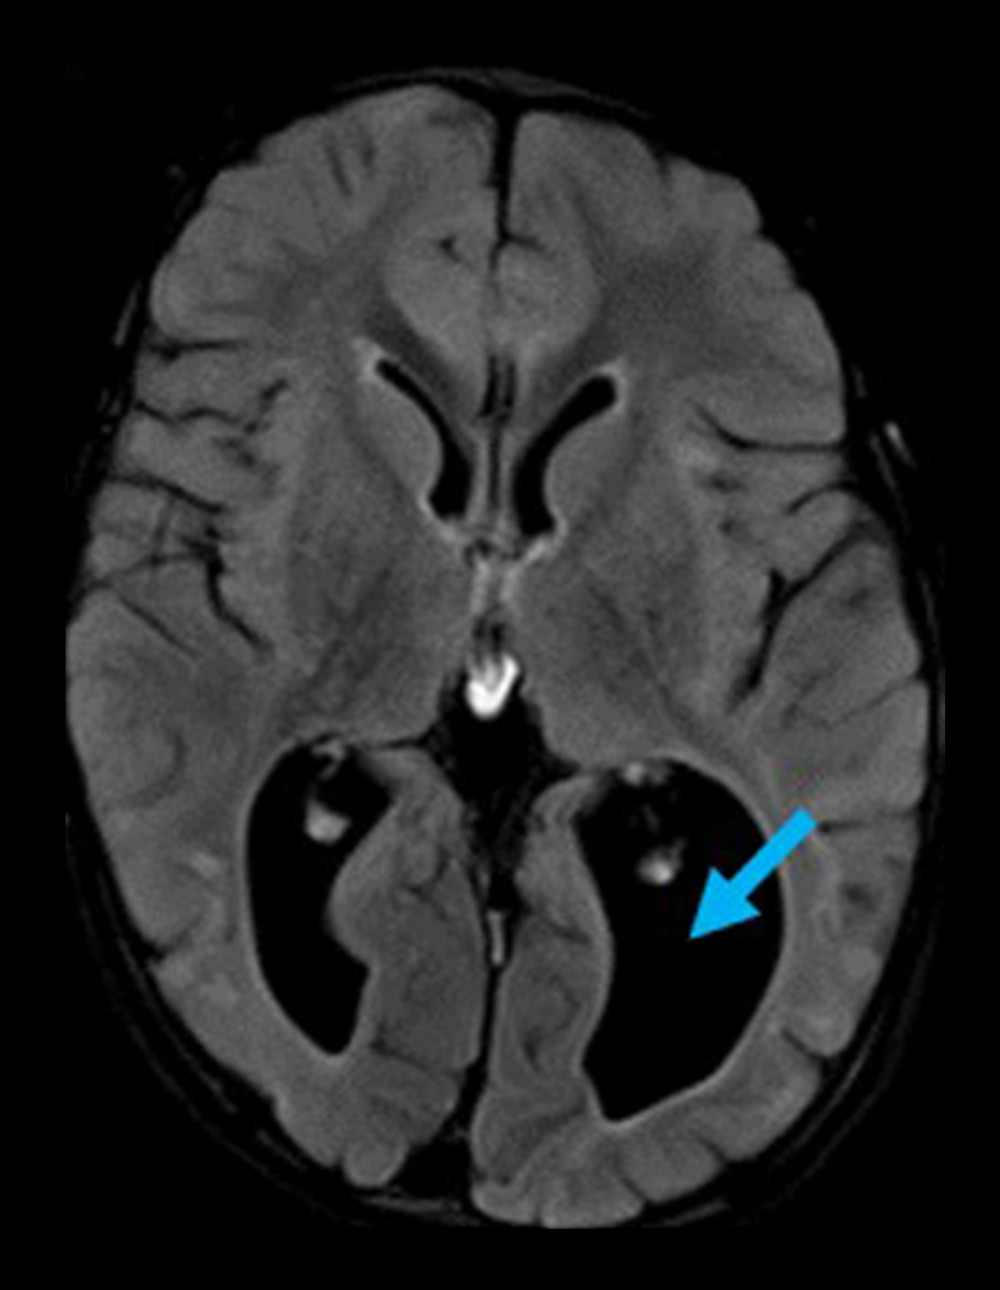 Fluid-attenuated inversion recovery (FLAIR) image 5 months from initial presentation showing improvement in findings of inflammation, given reduced hyperintensities. Also noted in this image is the visible loss of parenchymal volume and dilatation of the posterior elements of the lateral ventricles (blue arrow).